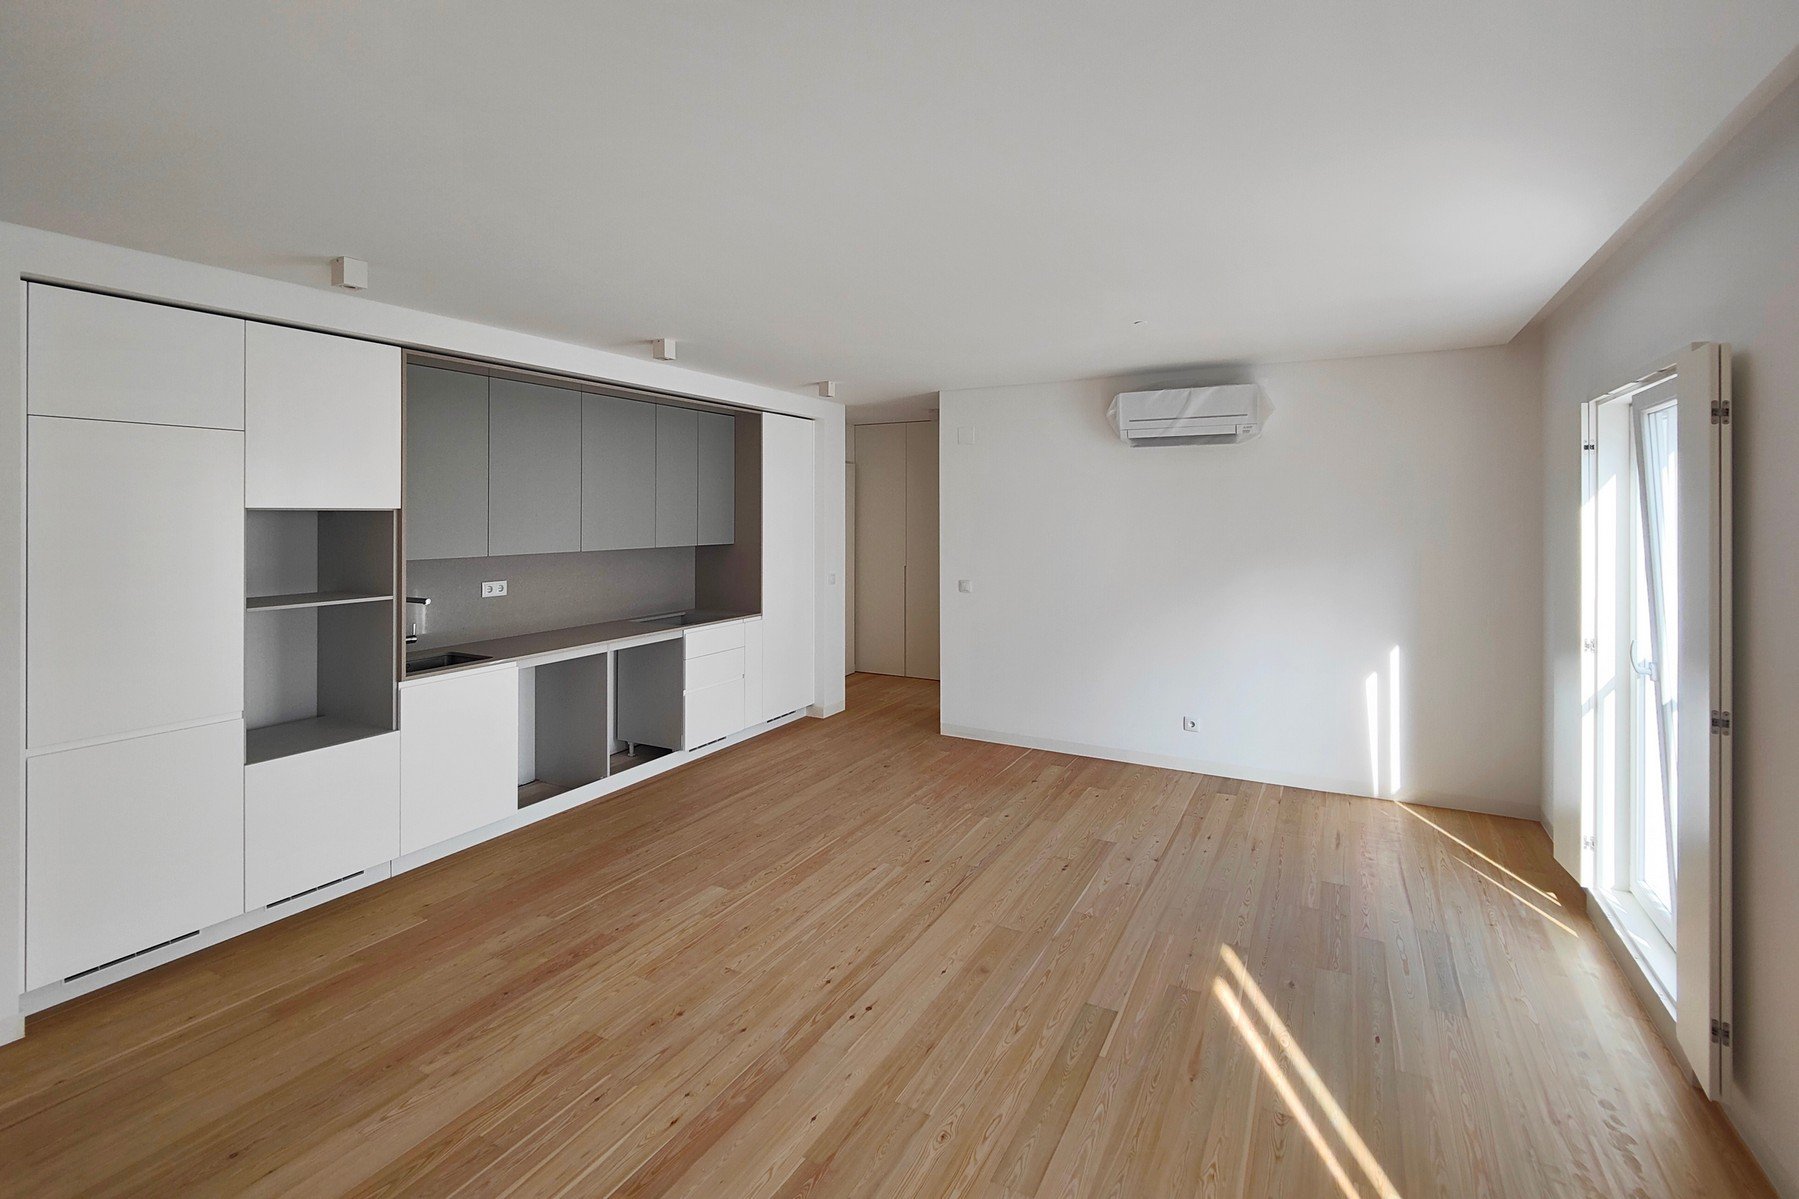 2 bedroom apartment in new development located in Campolide